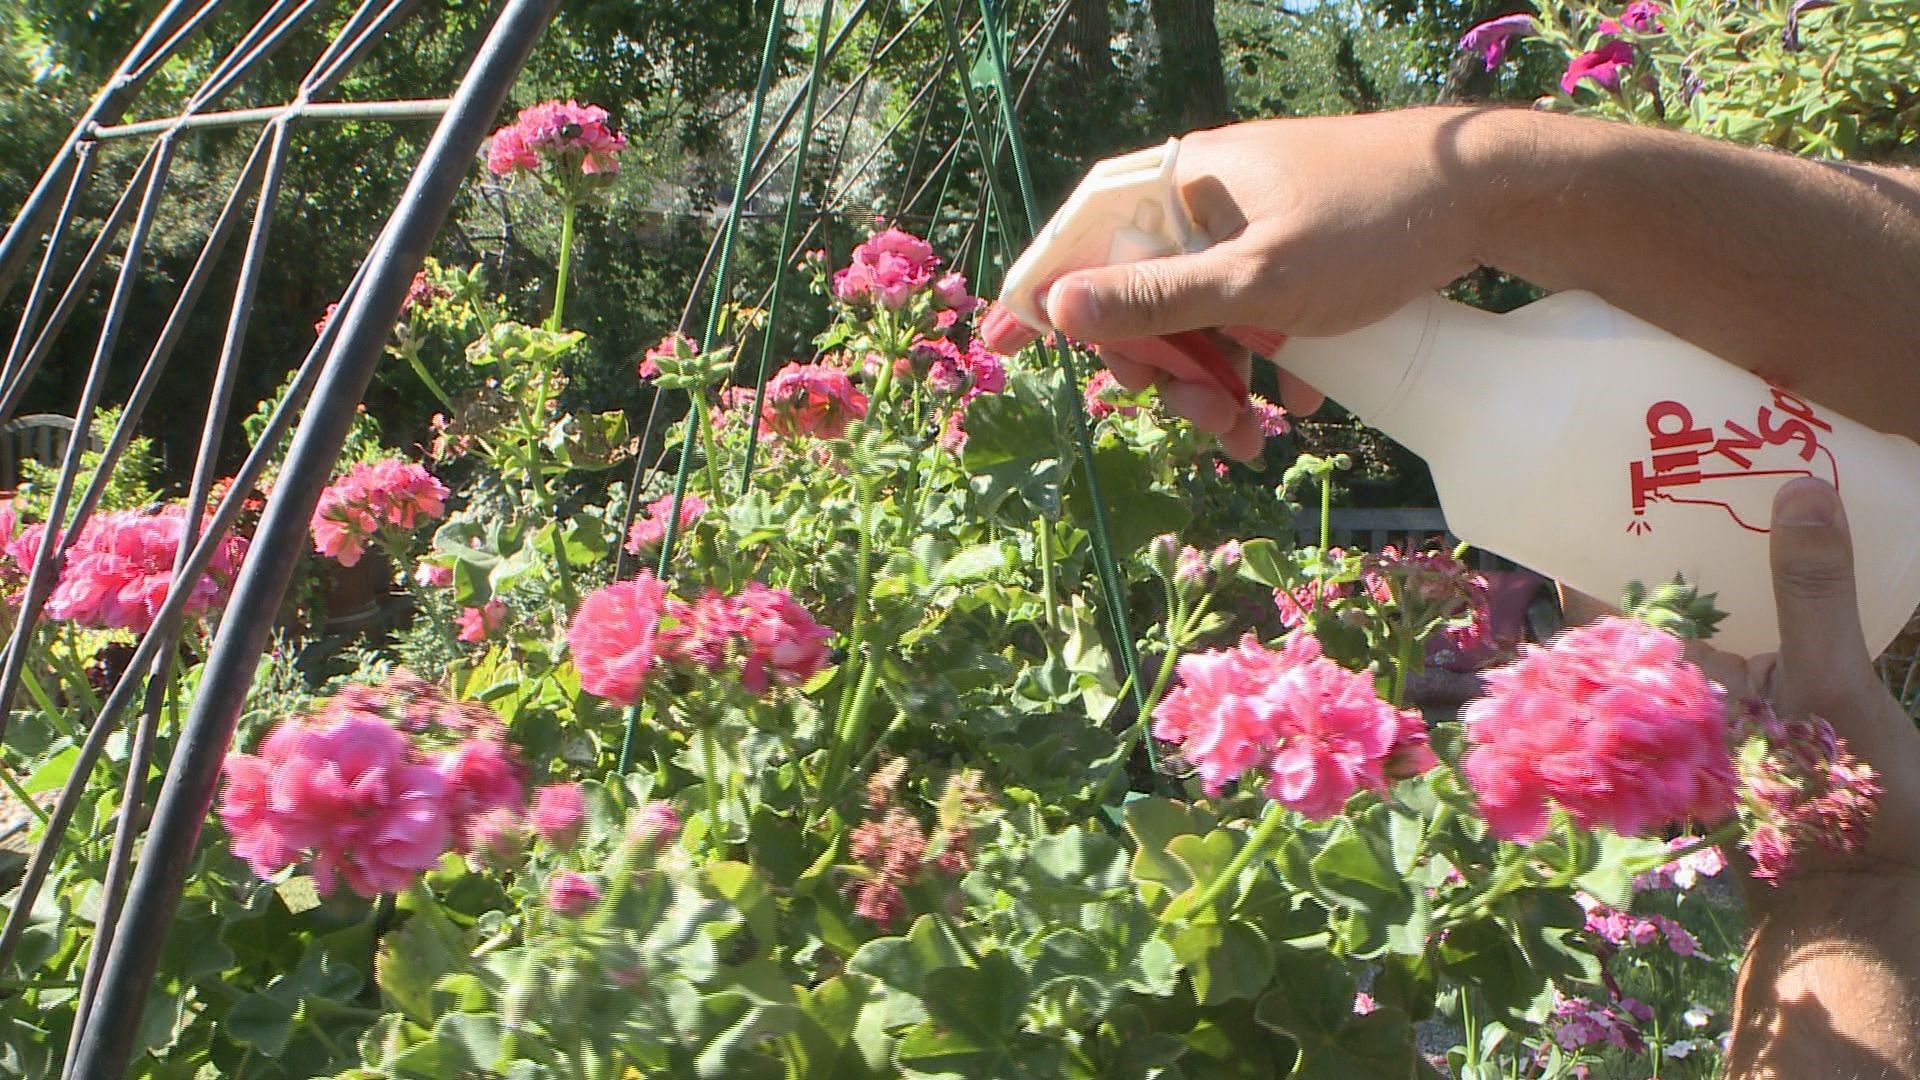 9NEWS Garden Expert Rob Proctor shows an effective way to get rid of Japanese beetles.